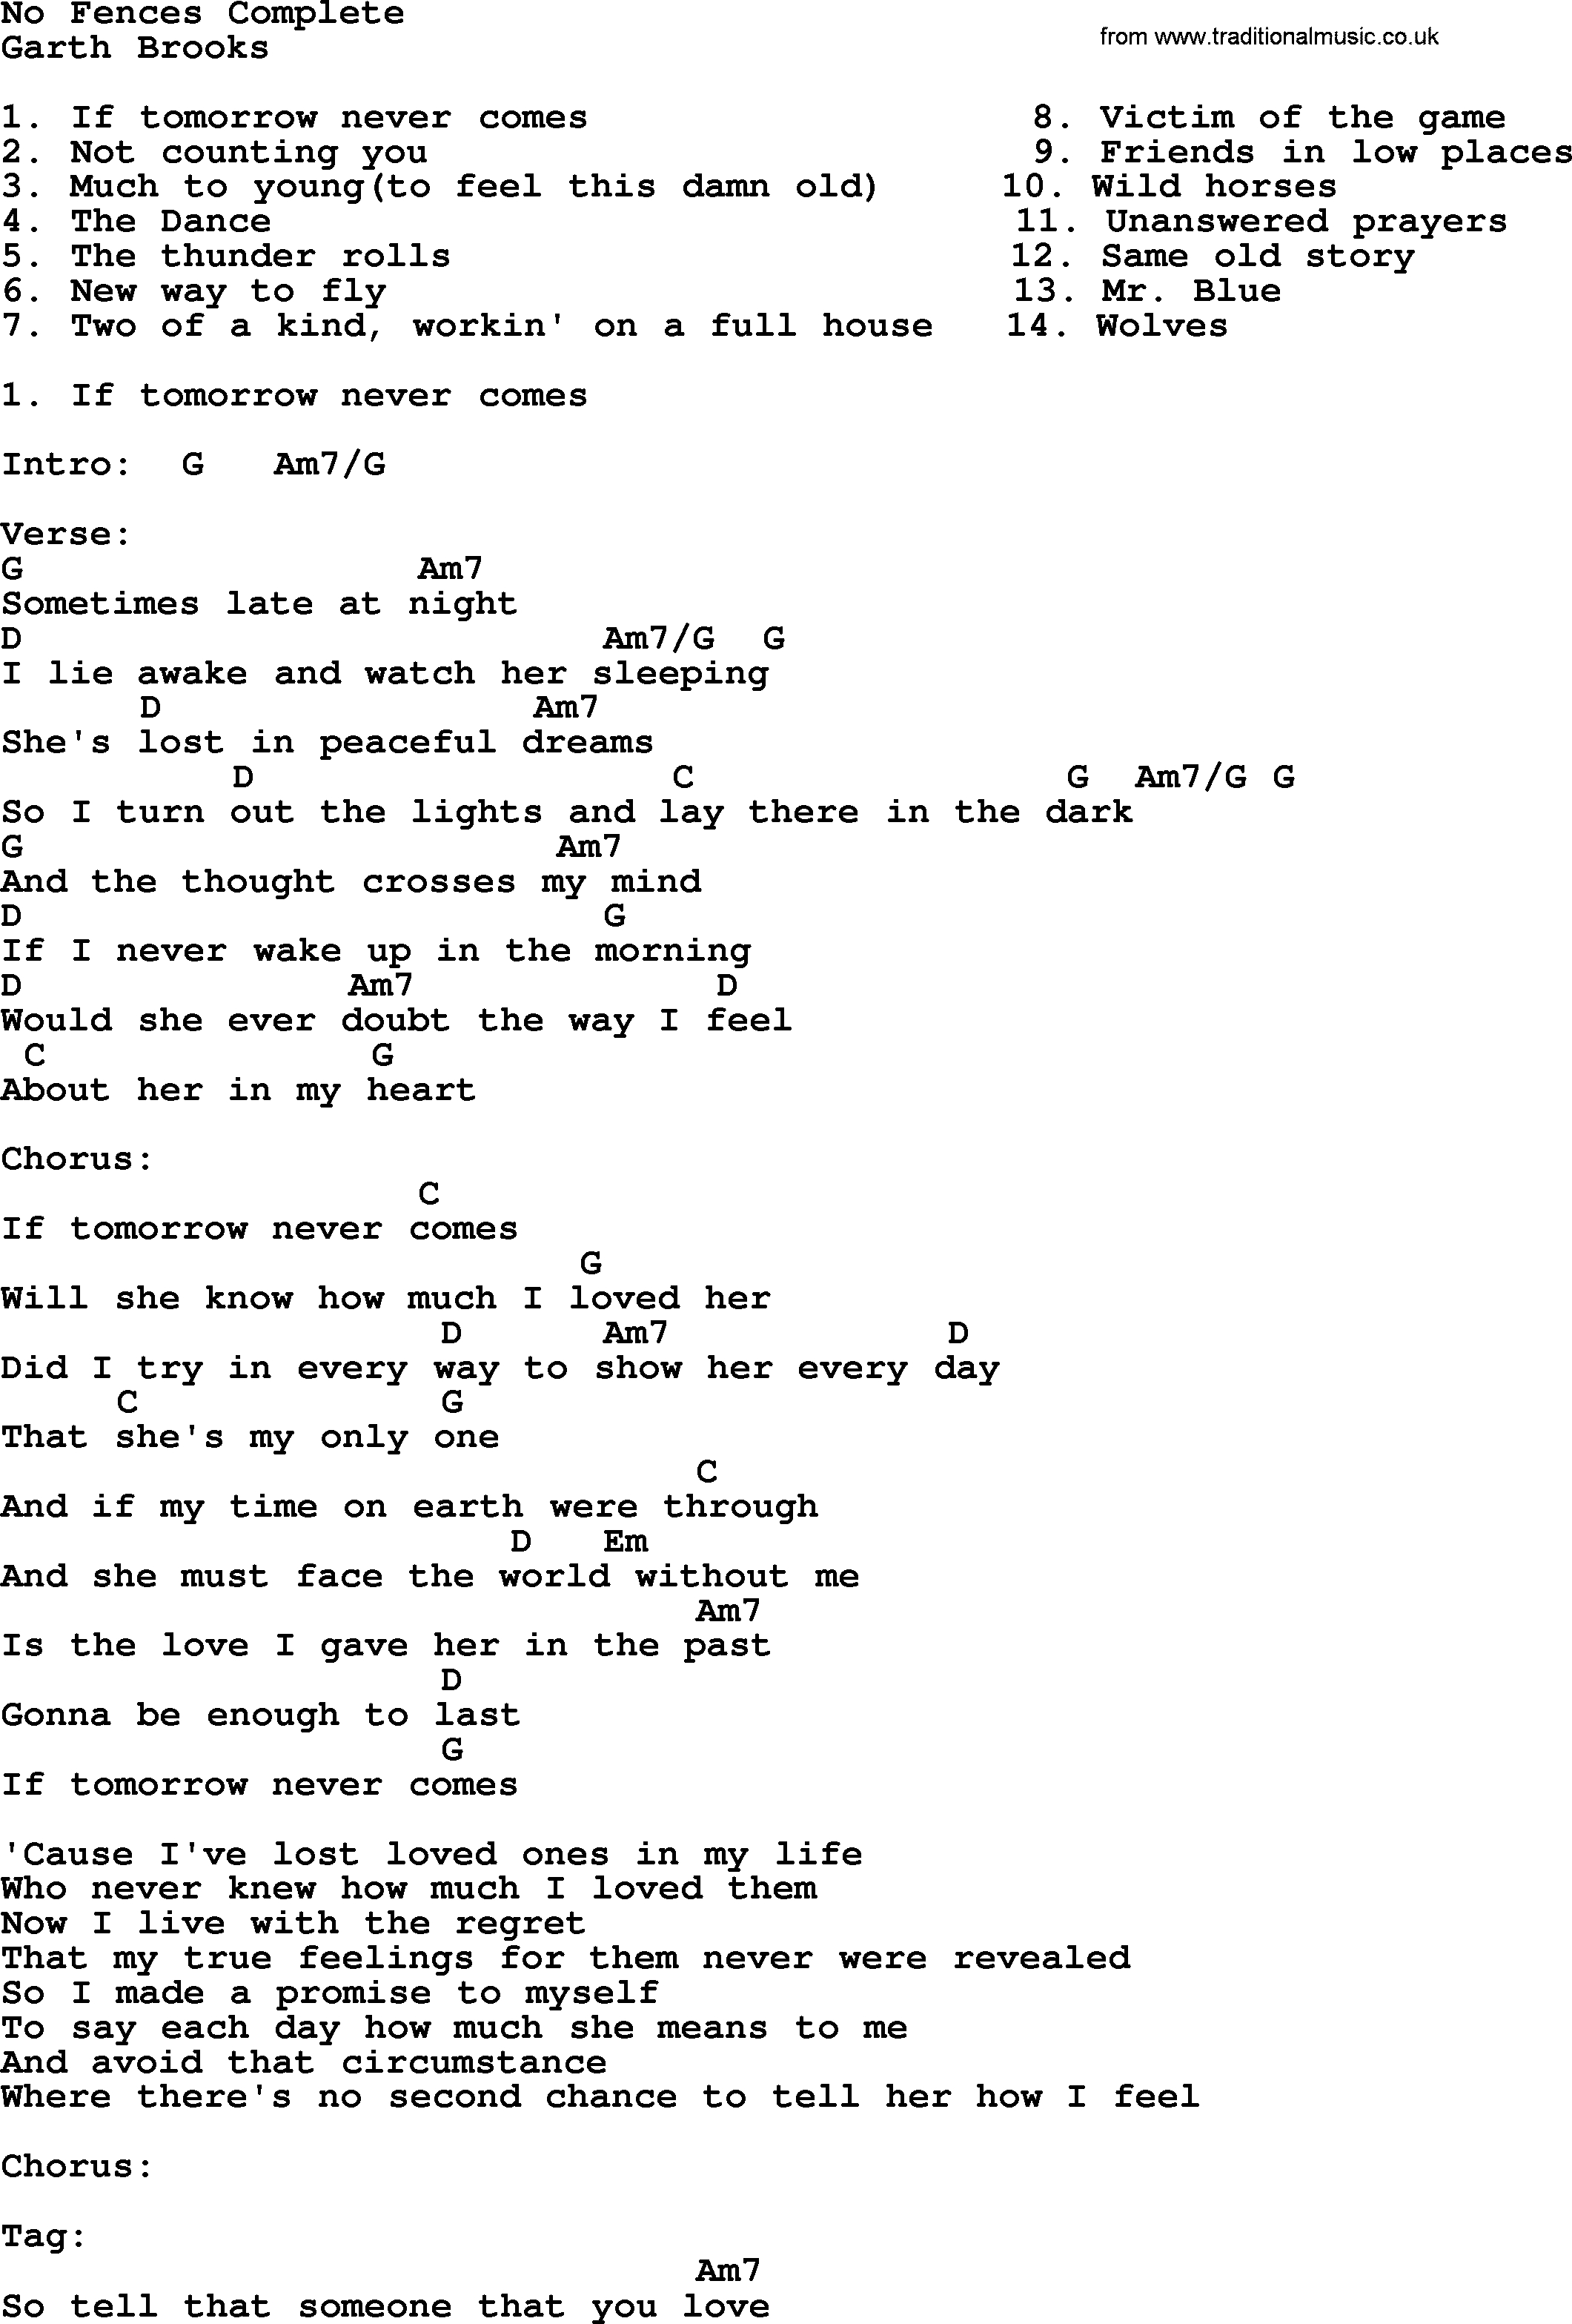 Friends In Low Places Chords No Fences Complete Garth Brooks Lyrics And Chords